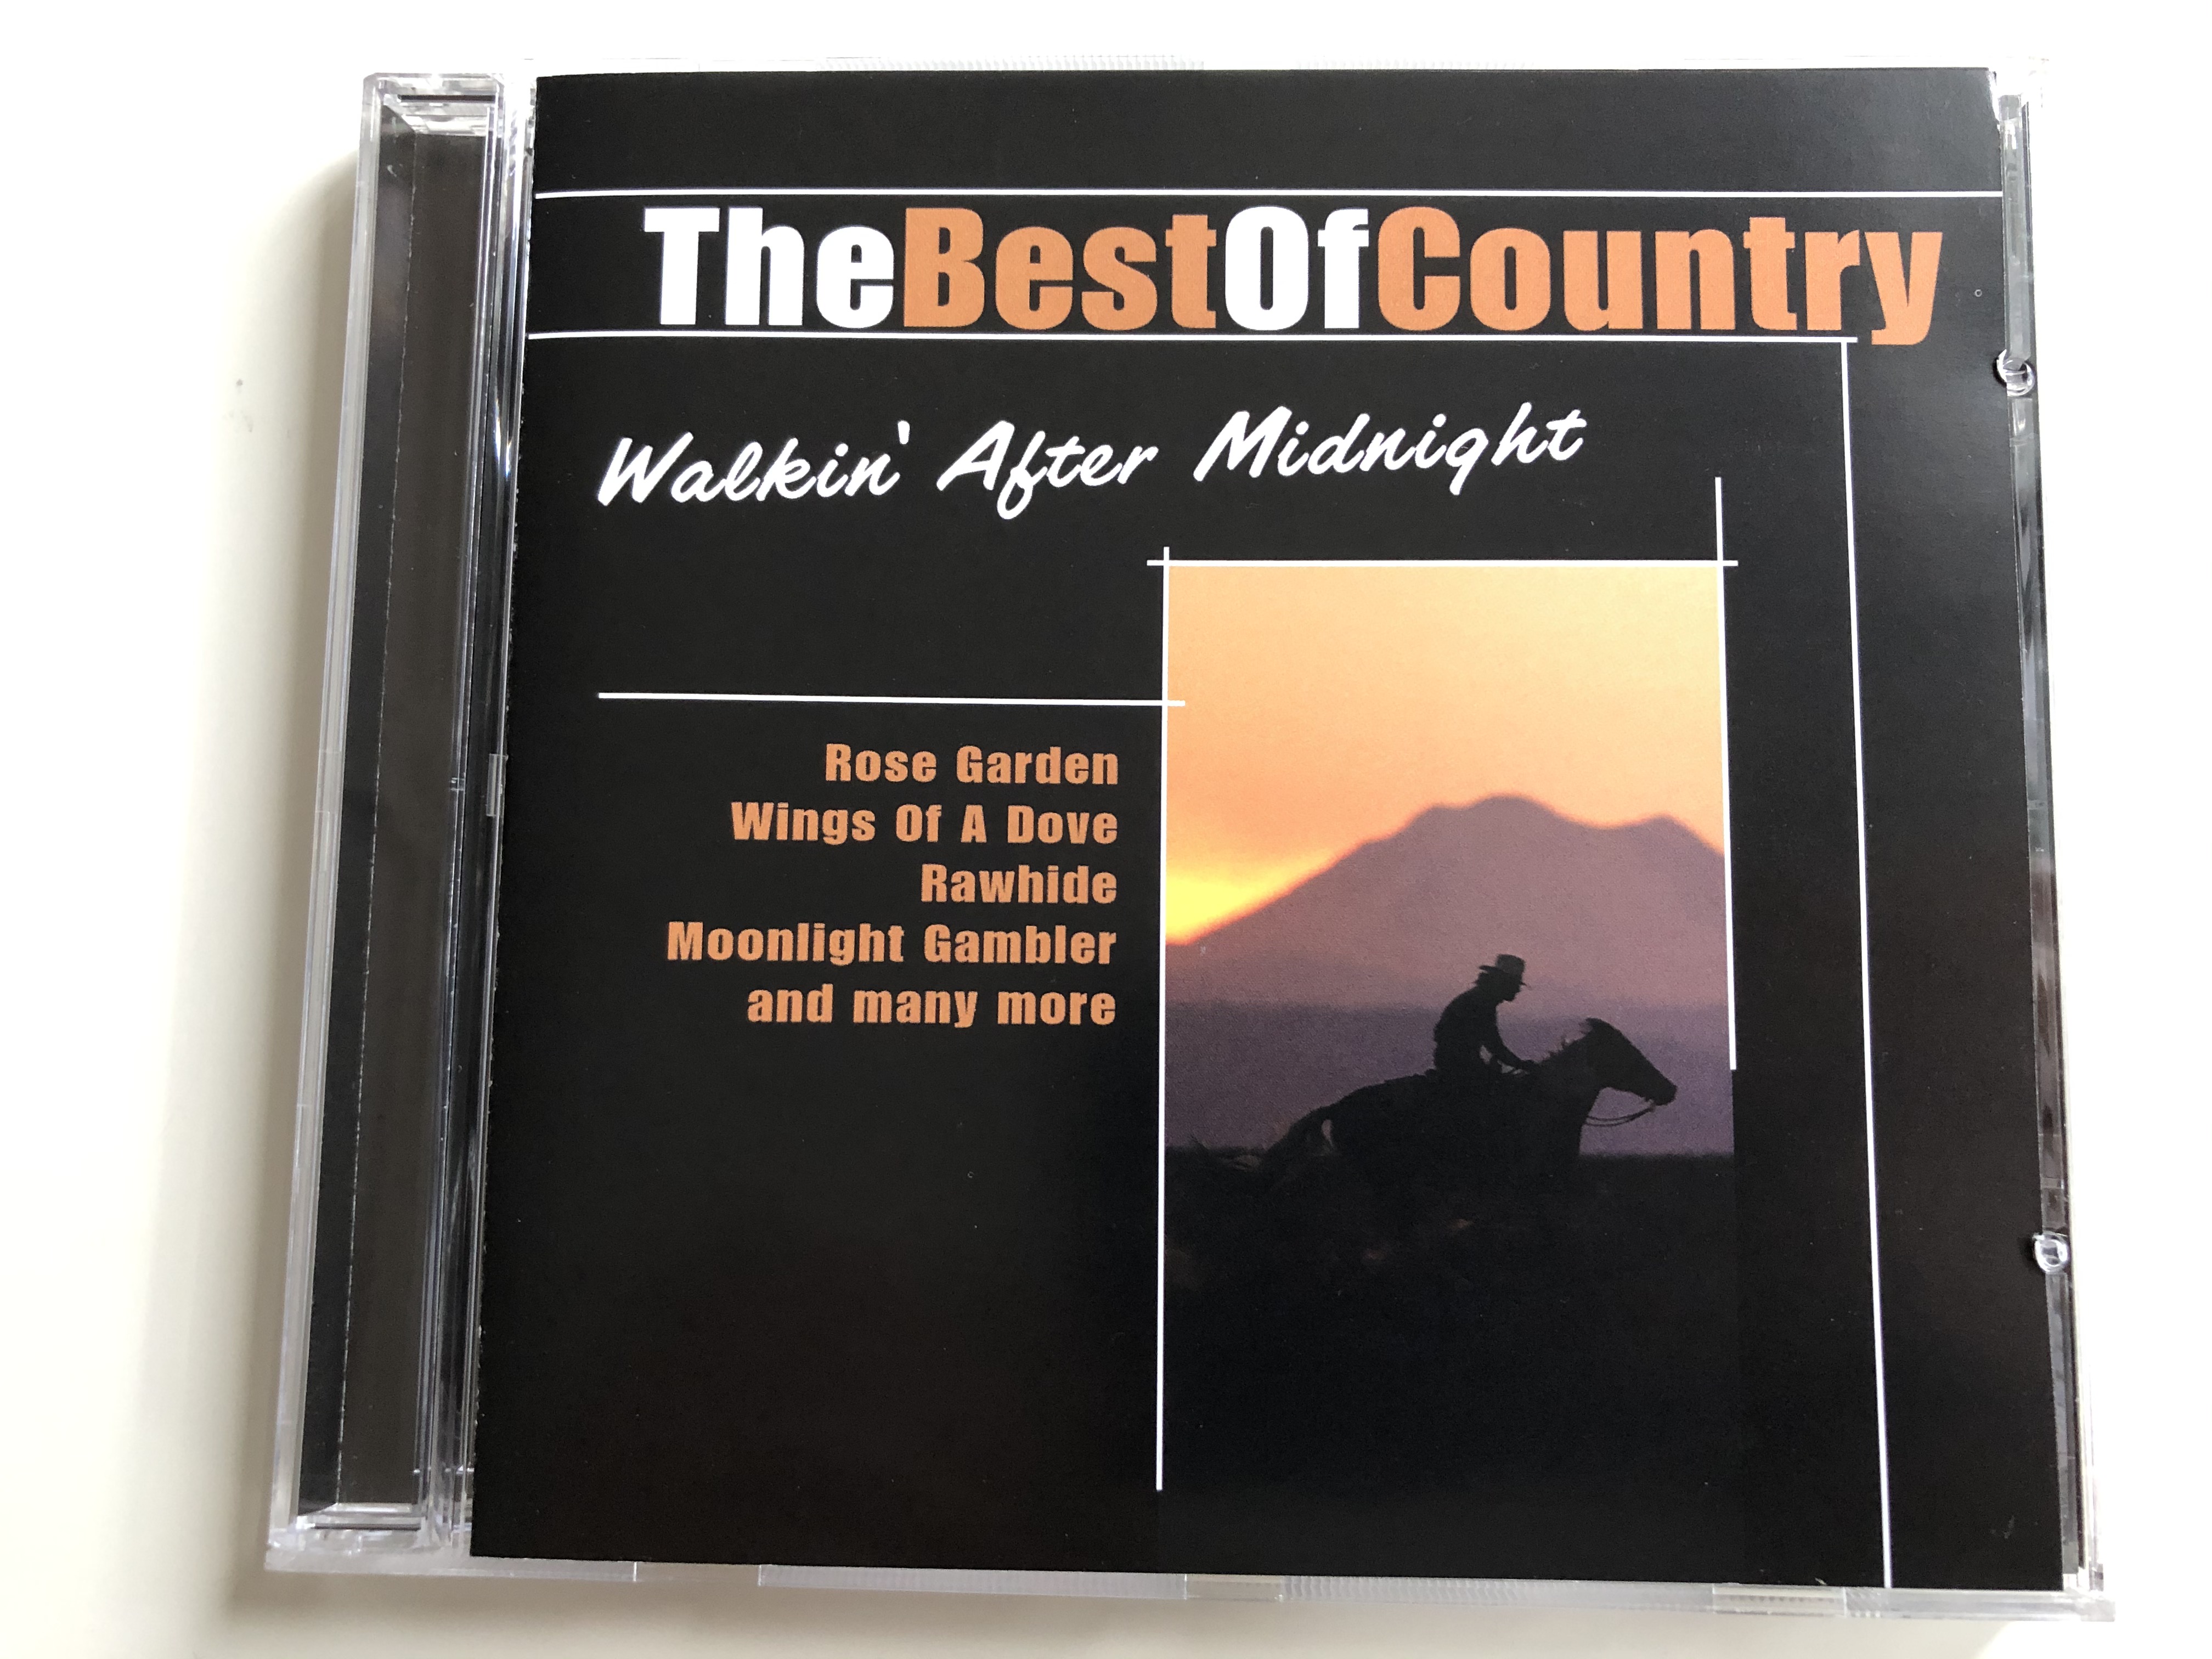 the-best-of-country-walkin-after-midnight-rose-garden-wings-of-a-dove-rawhide-moonlight-gambler-and-many-more-exclusive-edition-audio-cd-2005-21003-2-1-.jpg